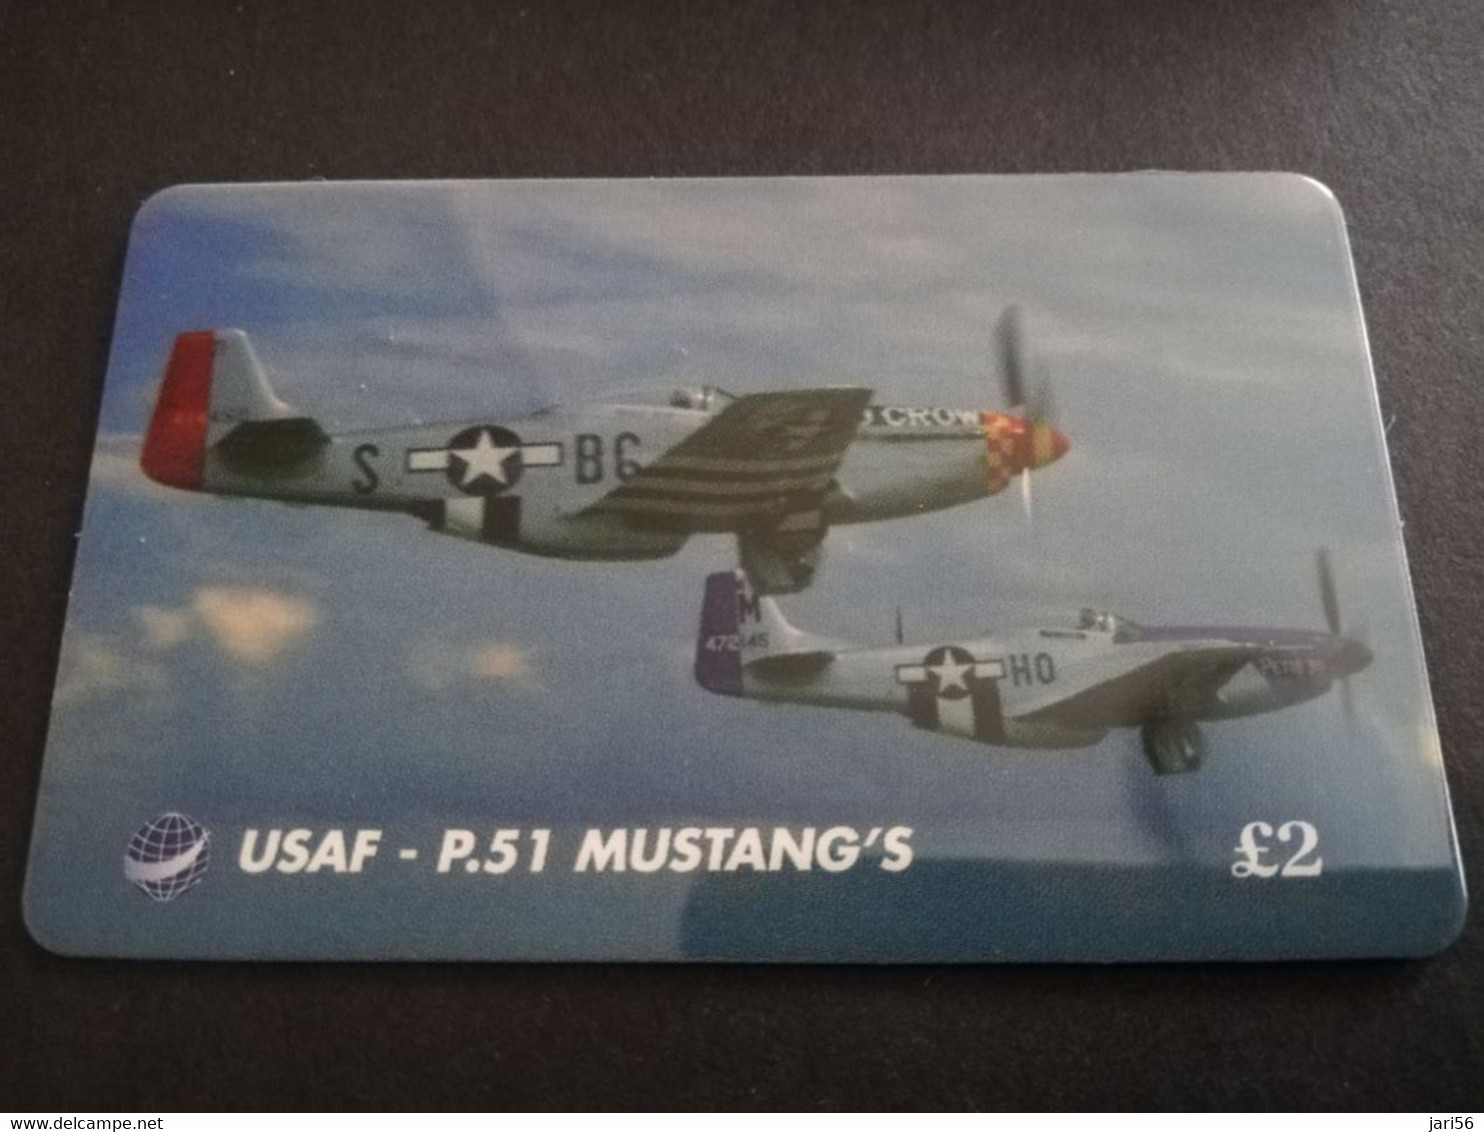 GREAT BRITAIN   2 POUND  AIR PLANES    USAF-P.51 MUSTANG'S   PREPAID CARD      **5447** - Collezioni